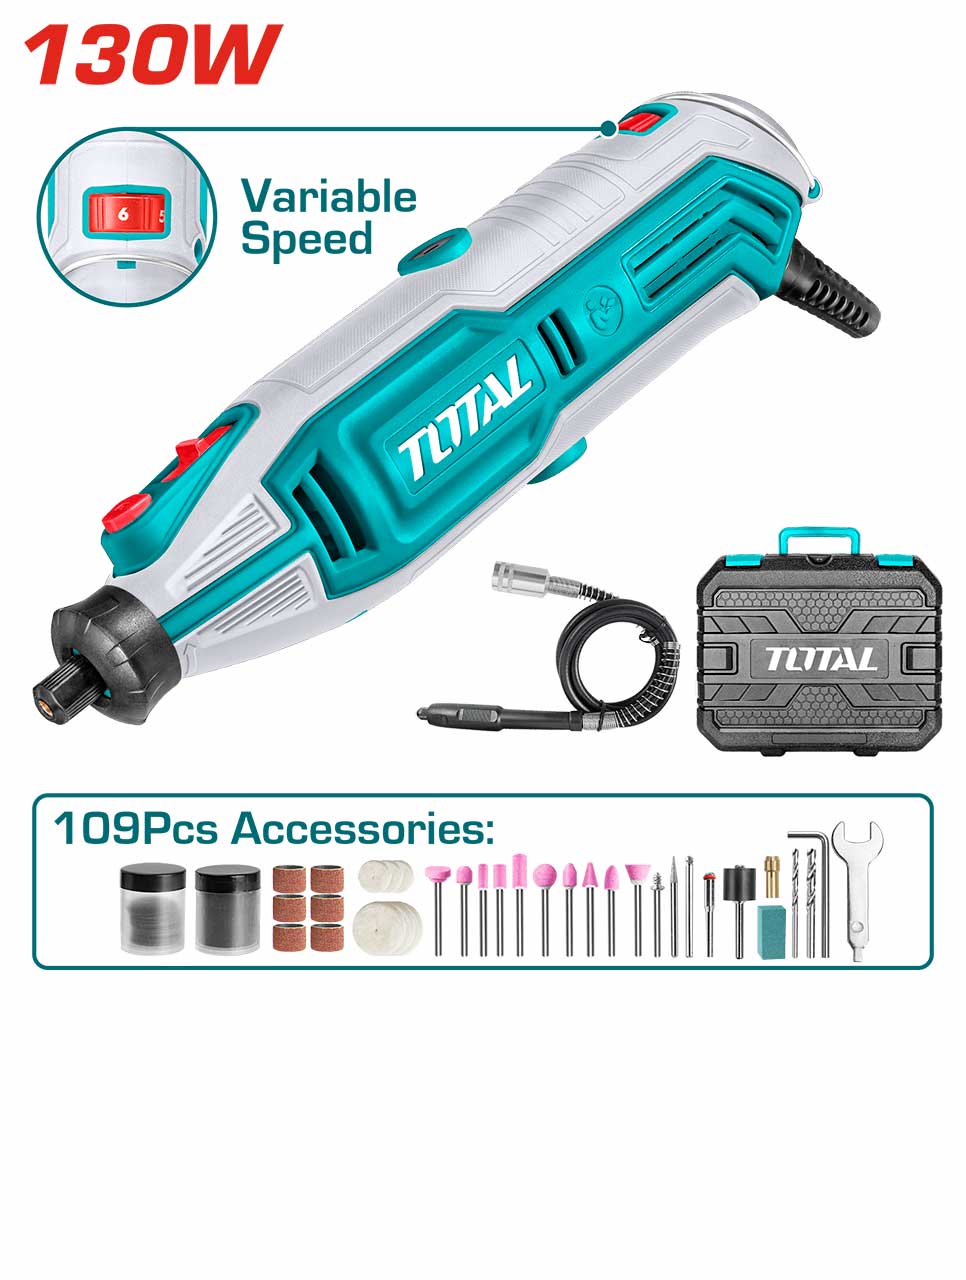 Total Mini Die Grinder 130W - TG513326 | Supply Master | Accra, Ghana Rotary & Oscillating Tool Buy Tools hardware Building materials